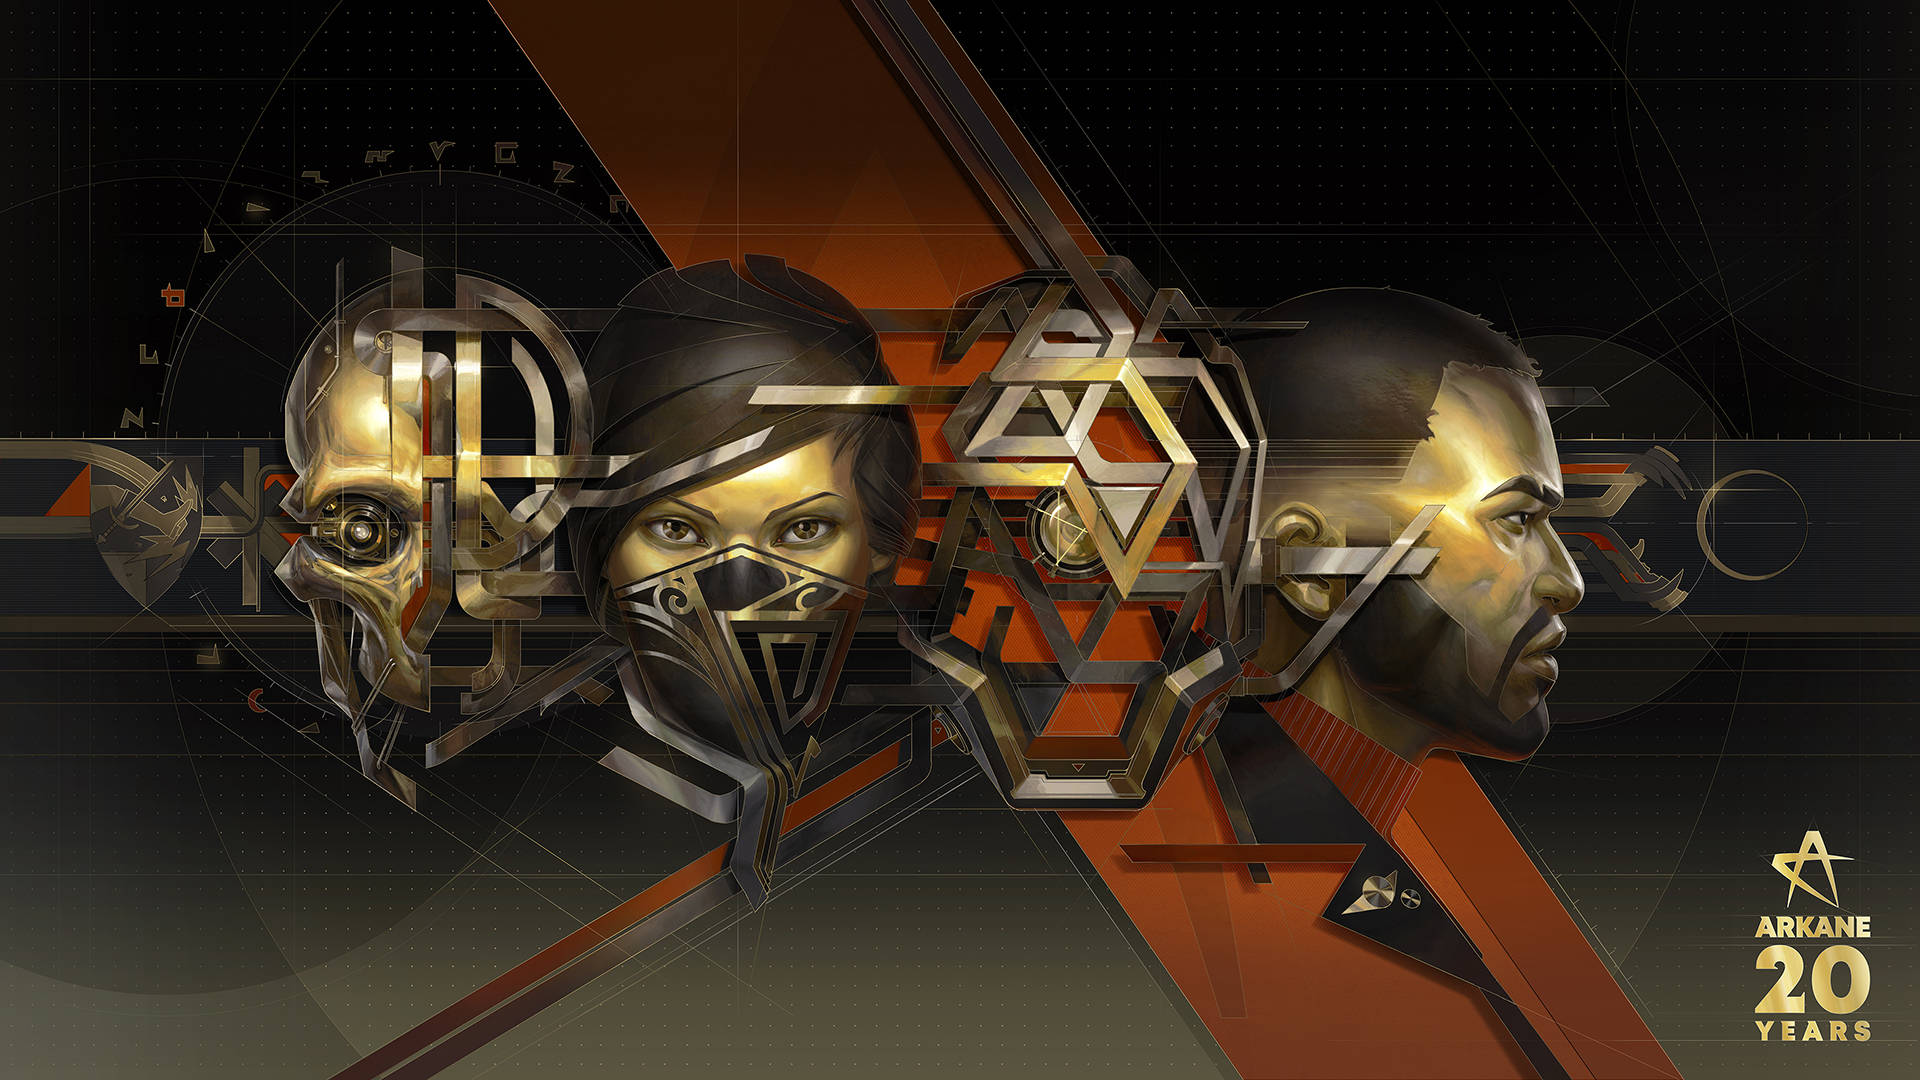 Experience The Action Of Prey In This Eye-catching Headshots Background